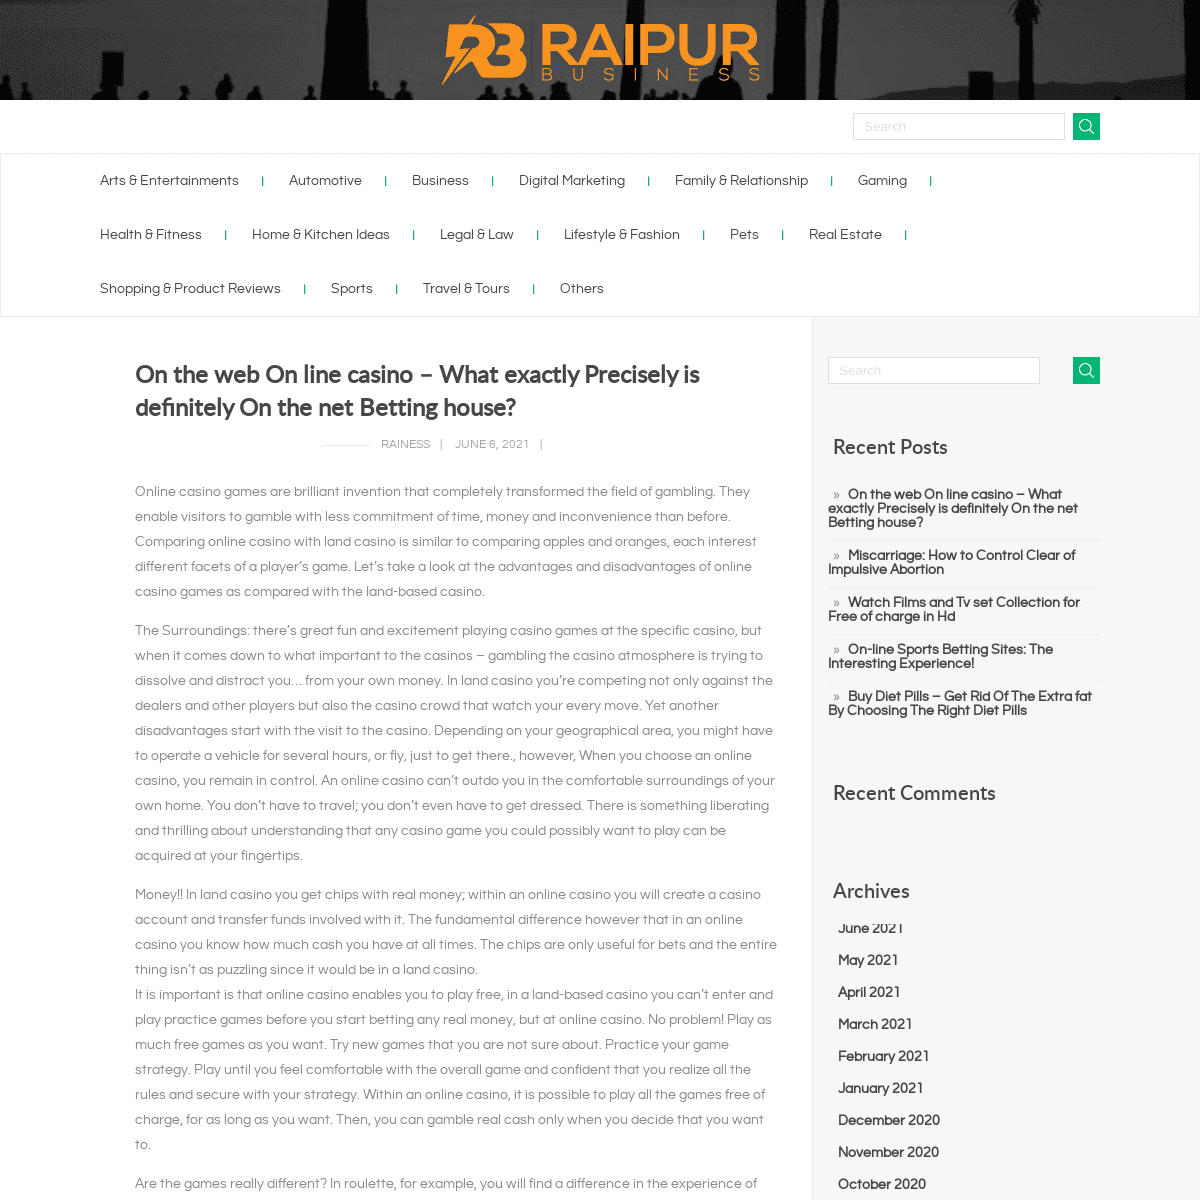 A complete backup of https://raipurbusiness.com